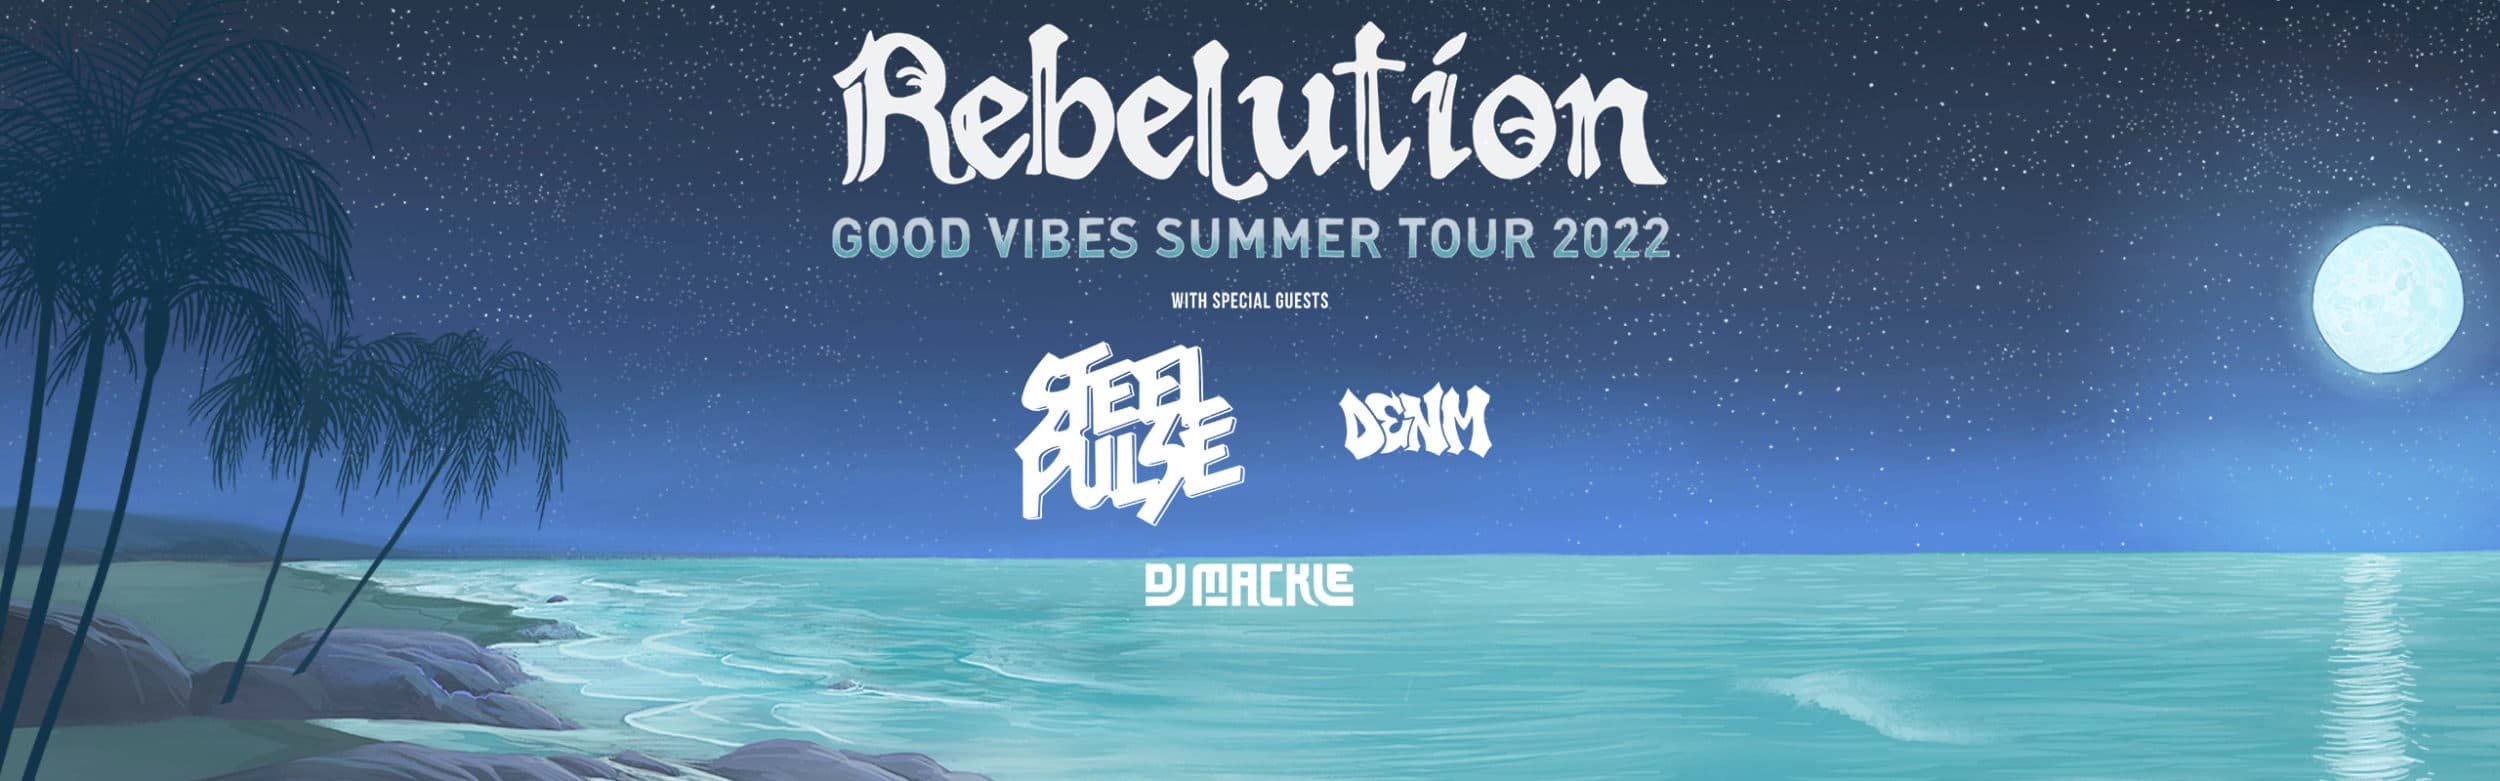 Rebelution - Good Vibes Summer Tour 2022 with special guests Steel Pulse, Denm, and DJ Mackie